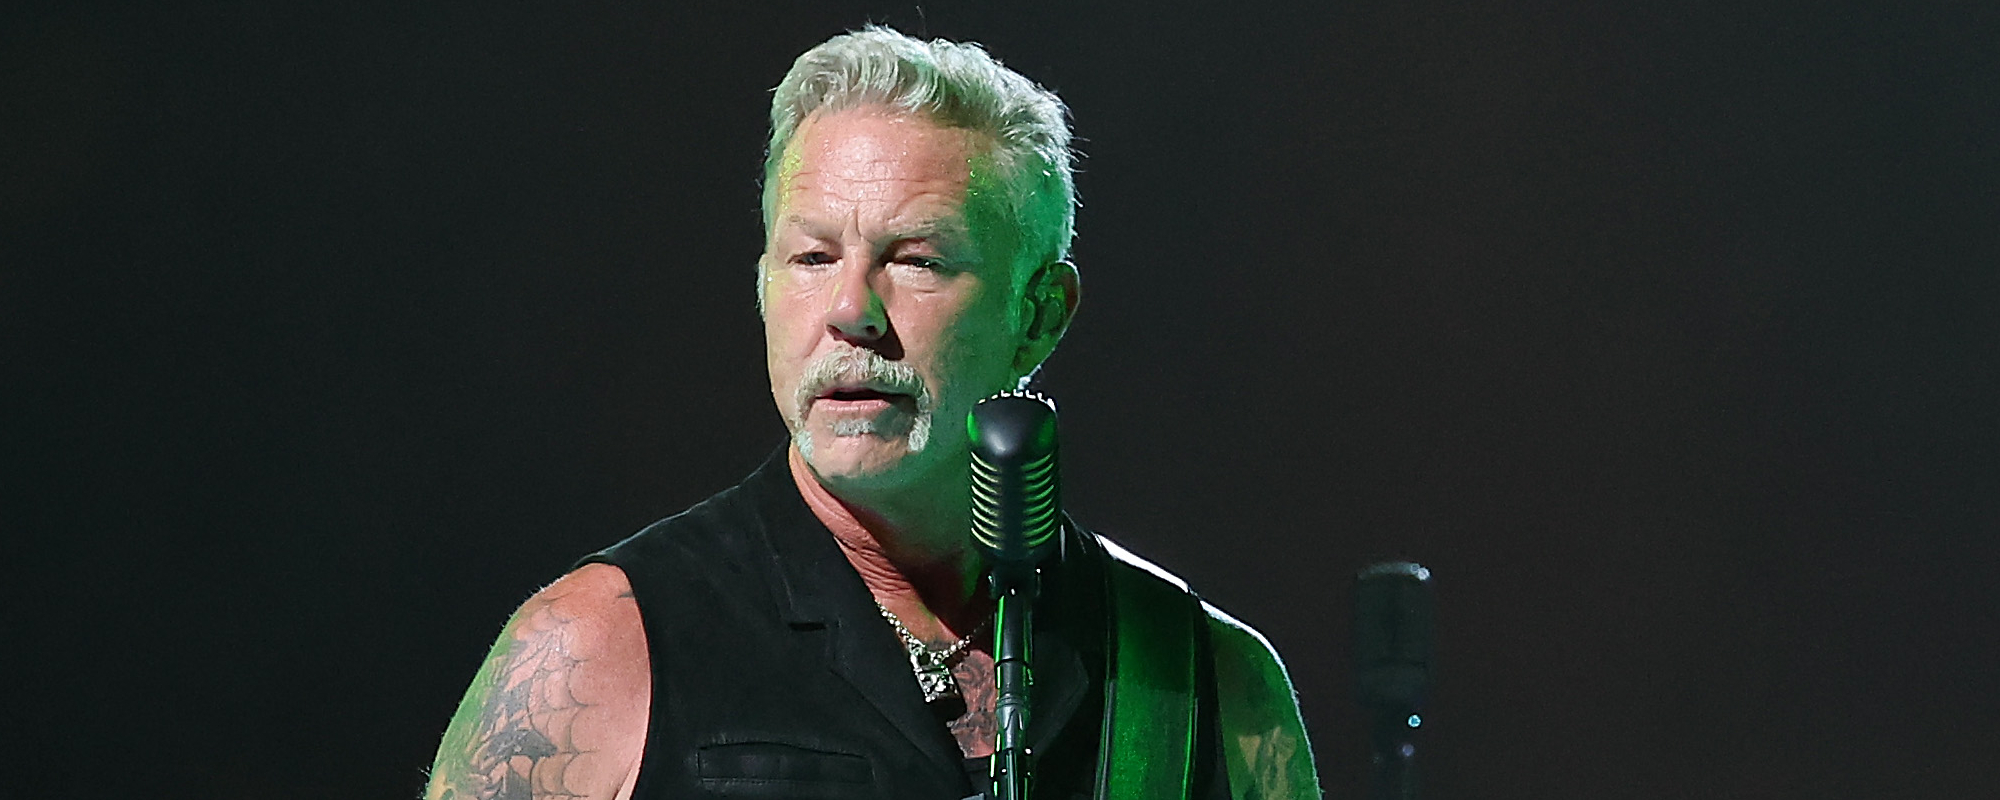 Metallica’s James Hetfield Honors Motörhead’s Lemmy Kilmister With Tattoo Featuring Singer’s Ashes